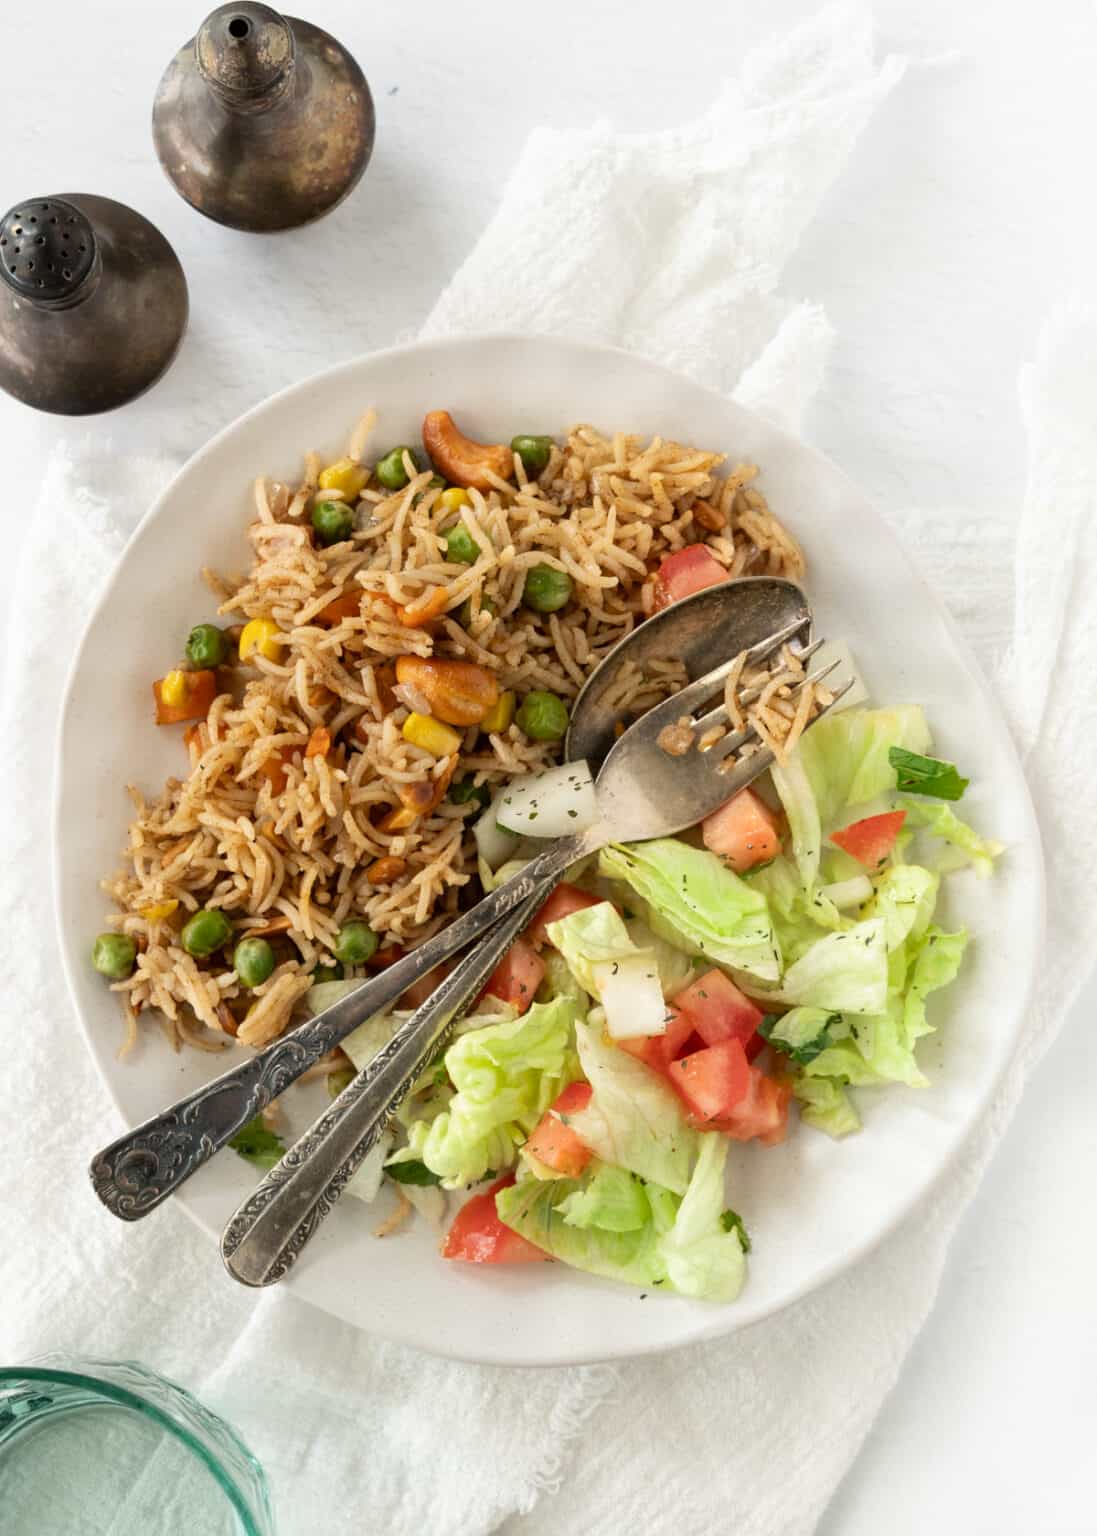 Lebanese Spiced Rice With Toasted Nuts and Vegetables